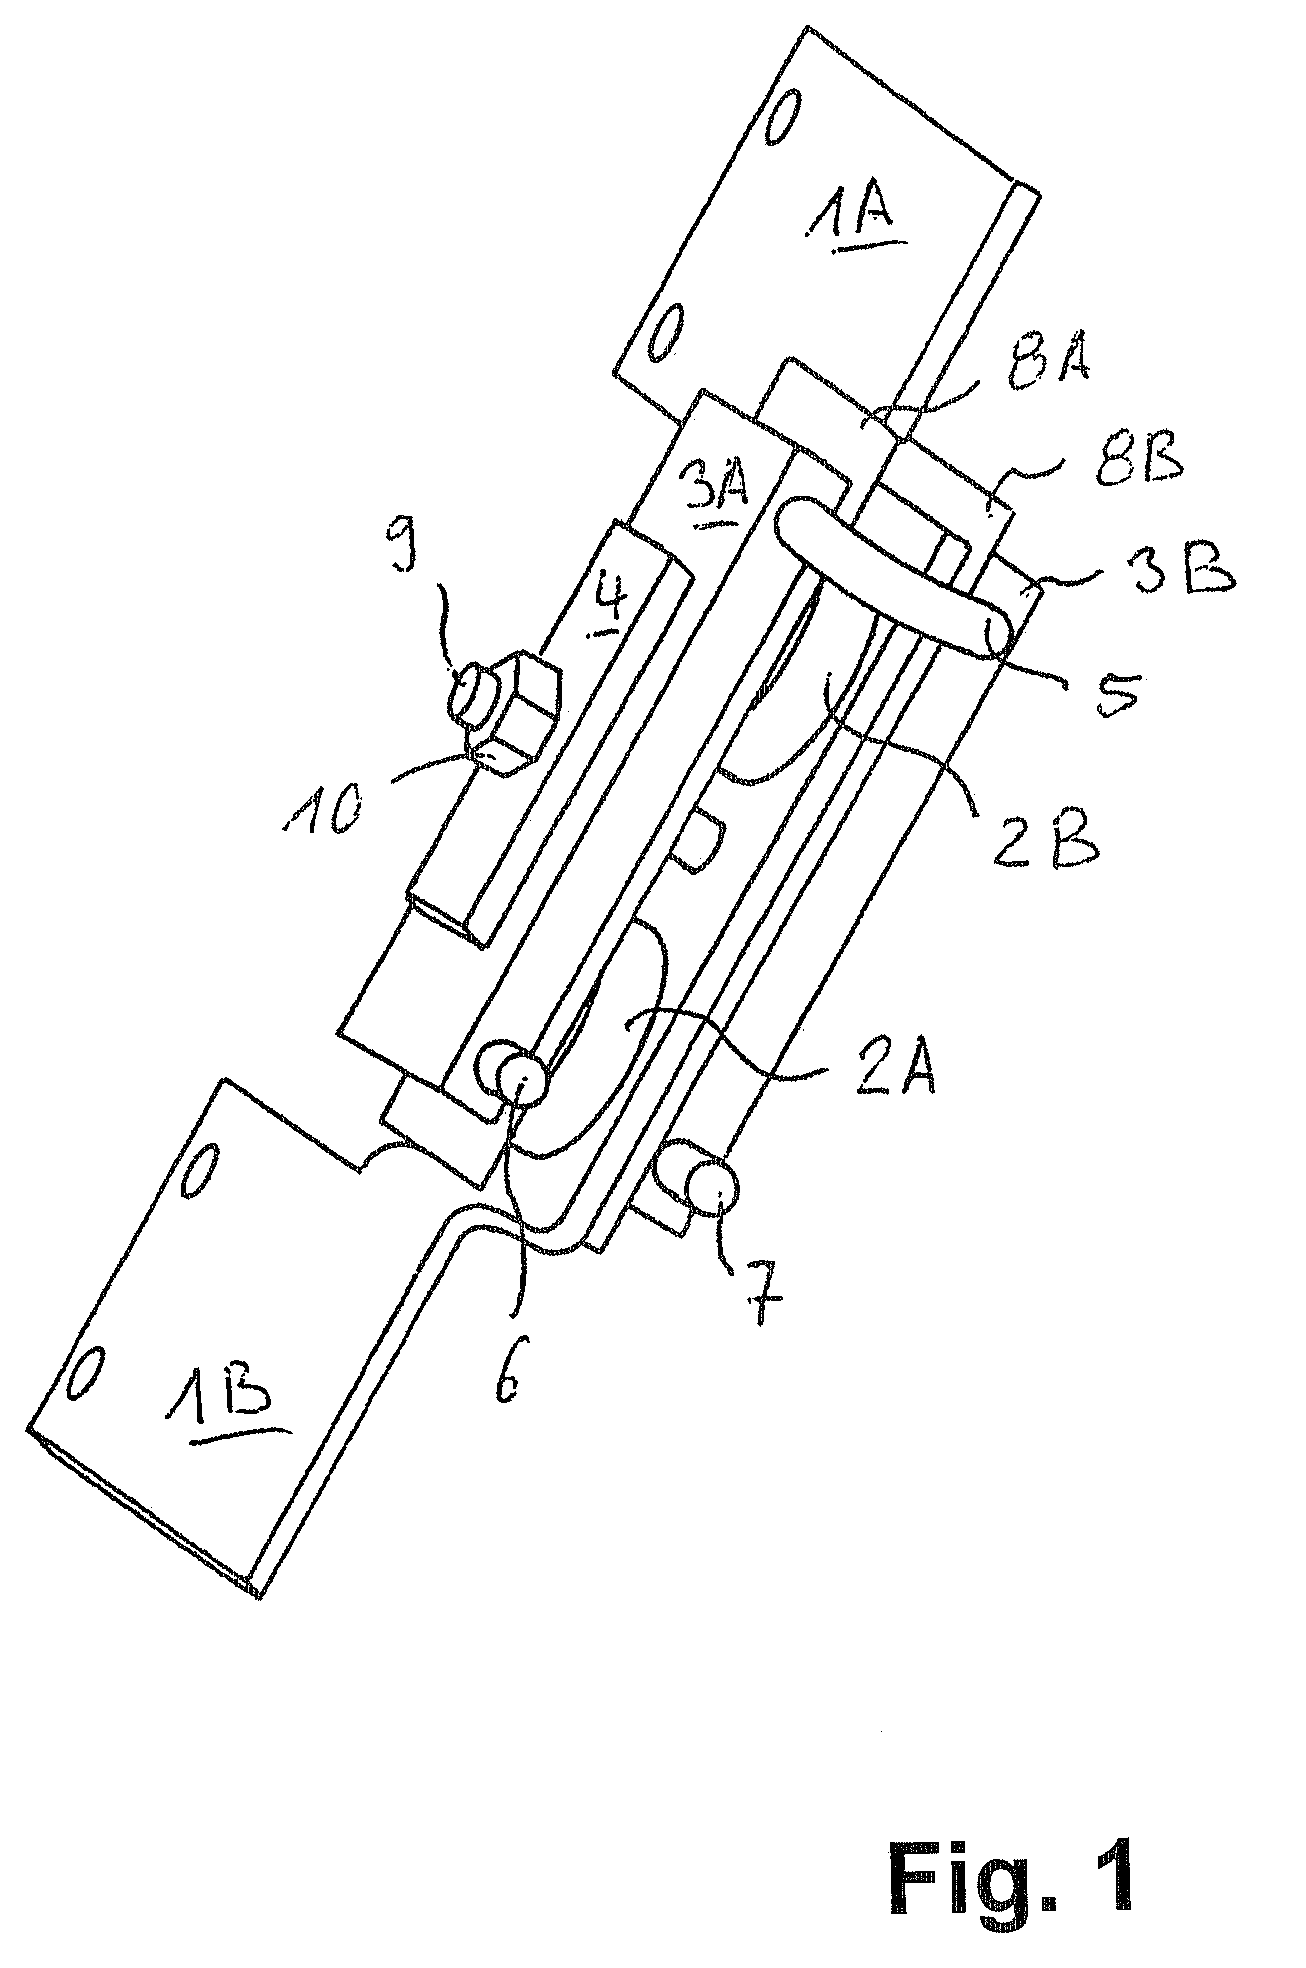 Switching module for the power section of a welding control system